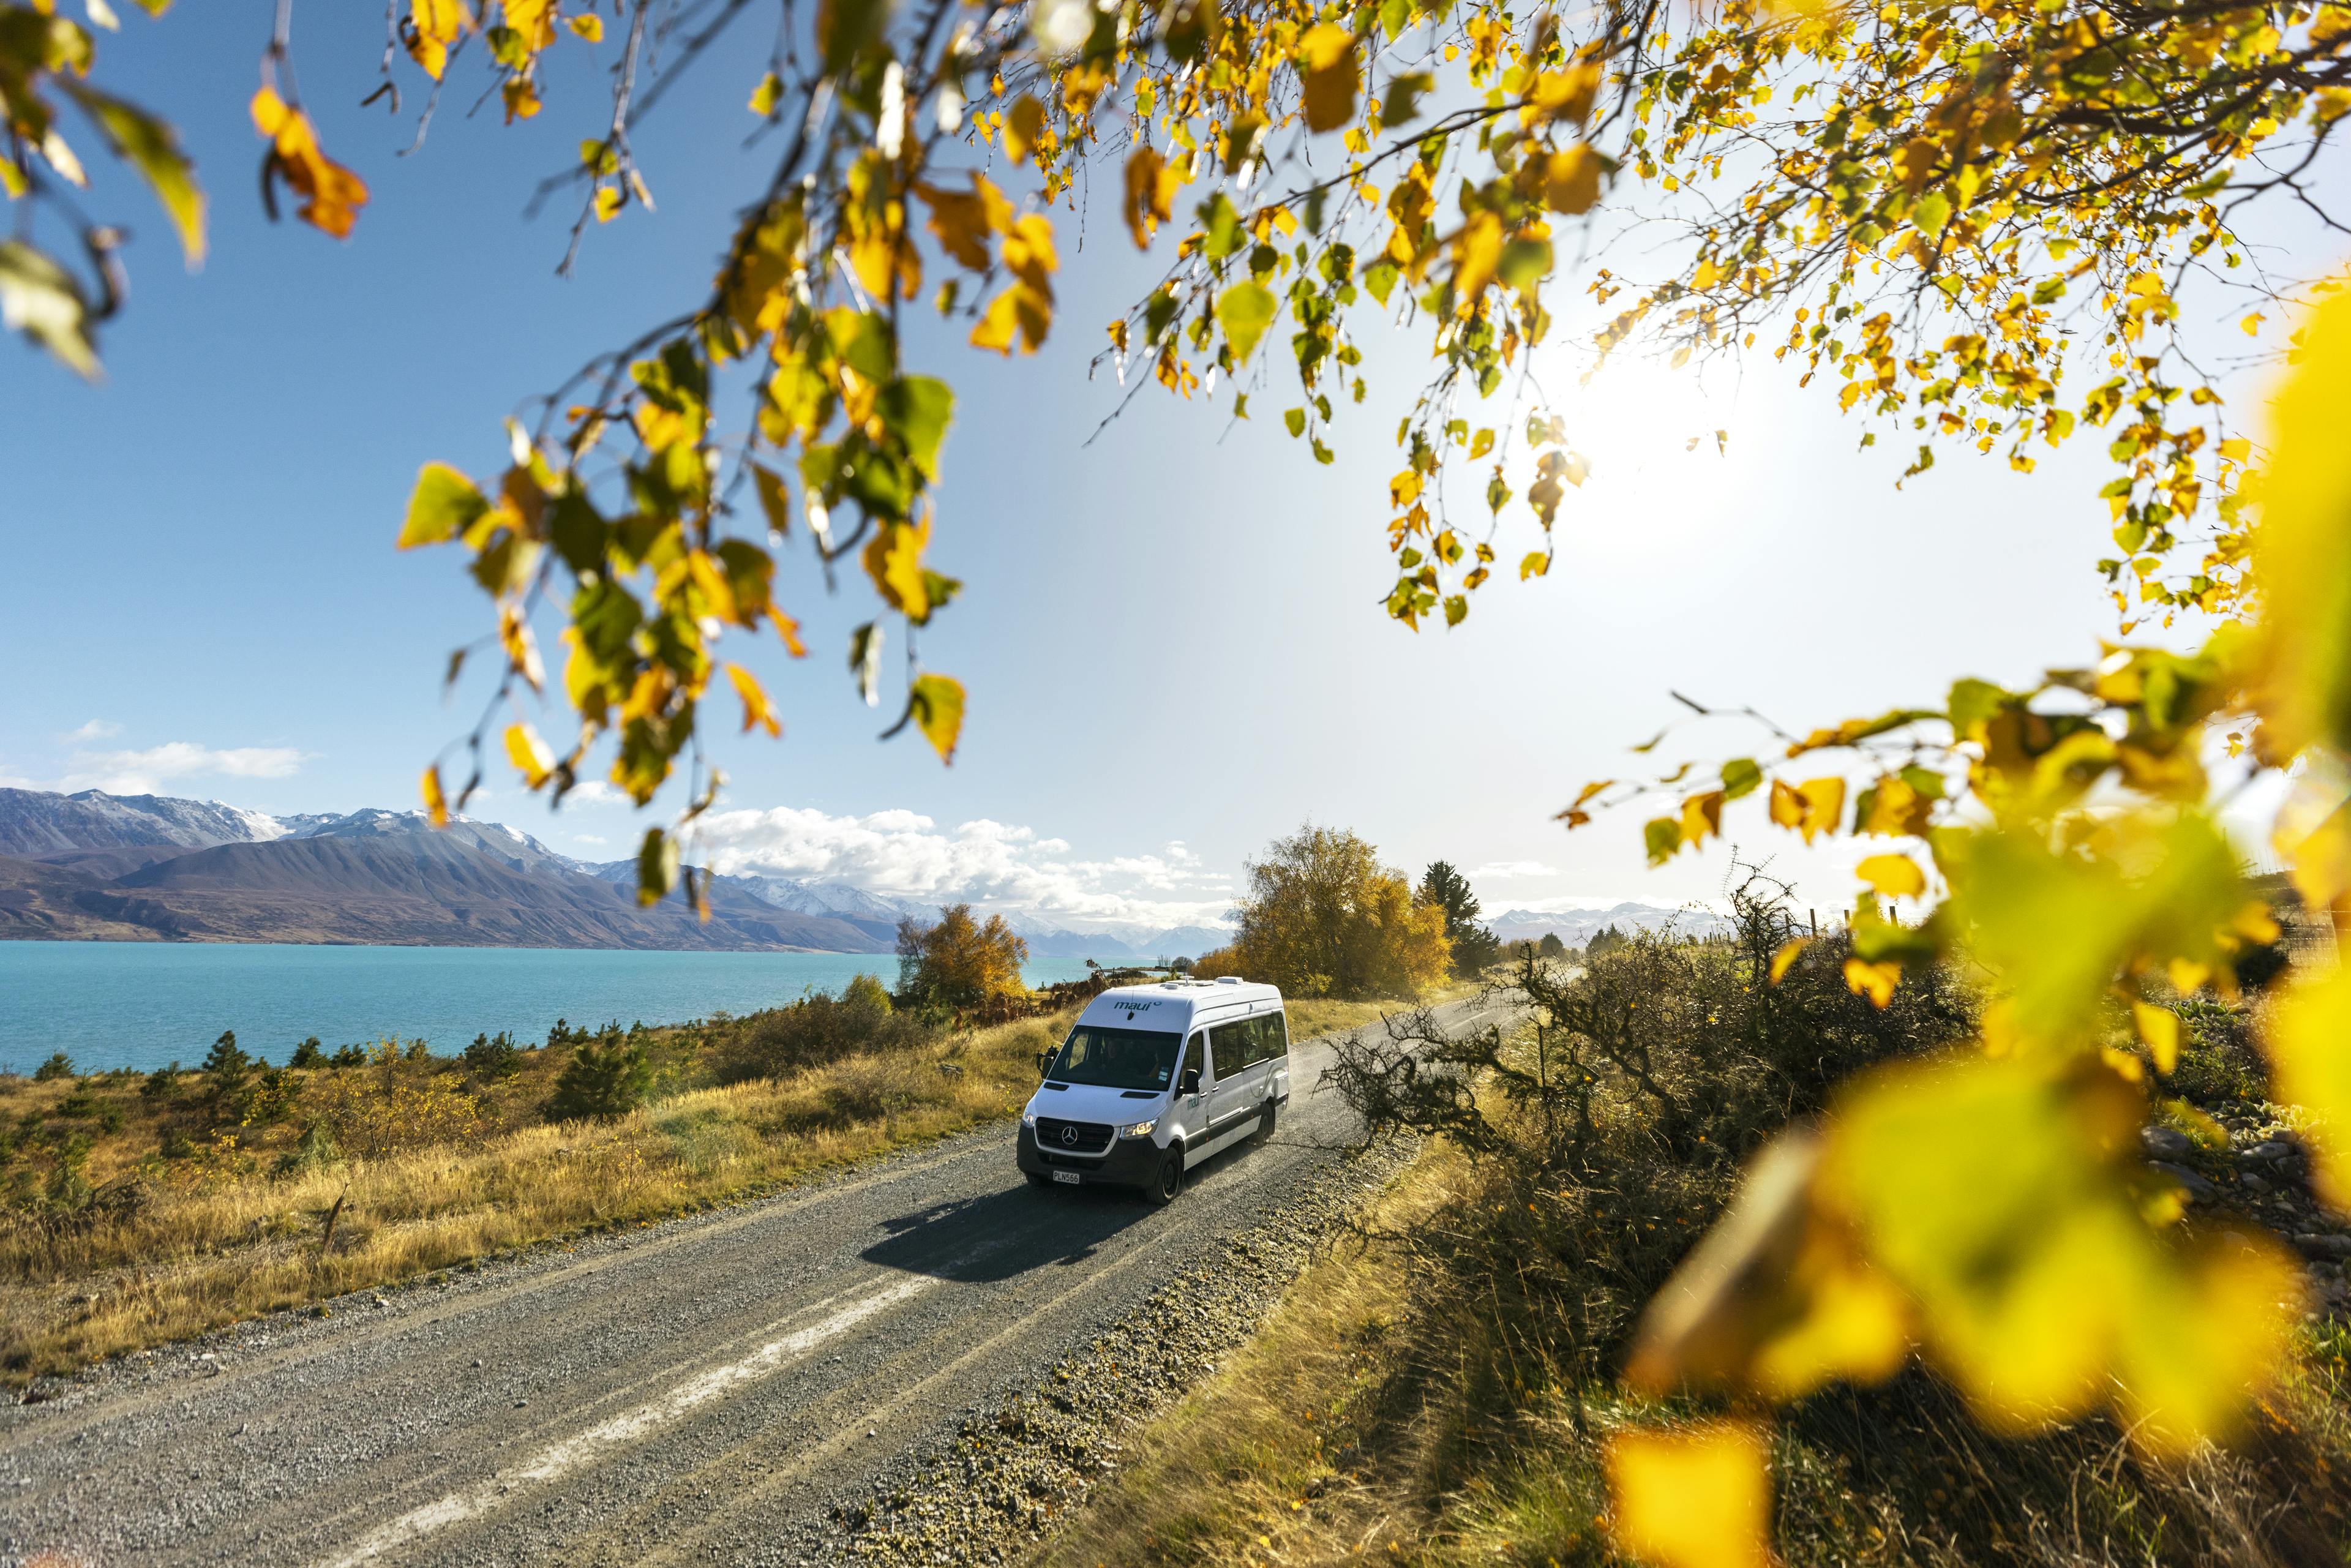 A campervan on a beautiful road near a lake in autumn